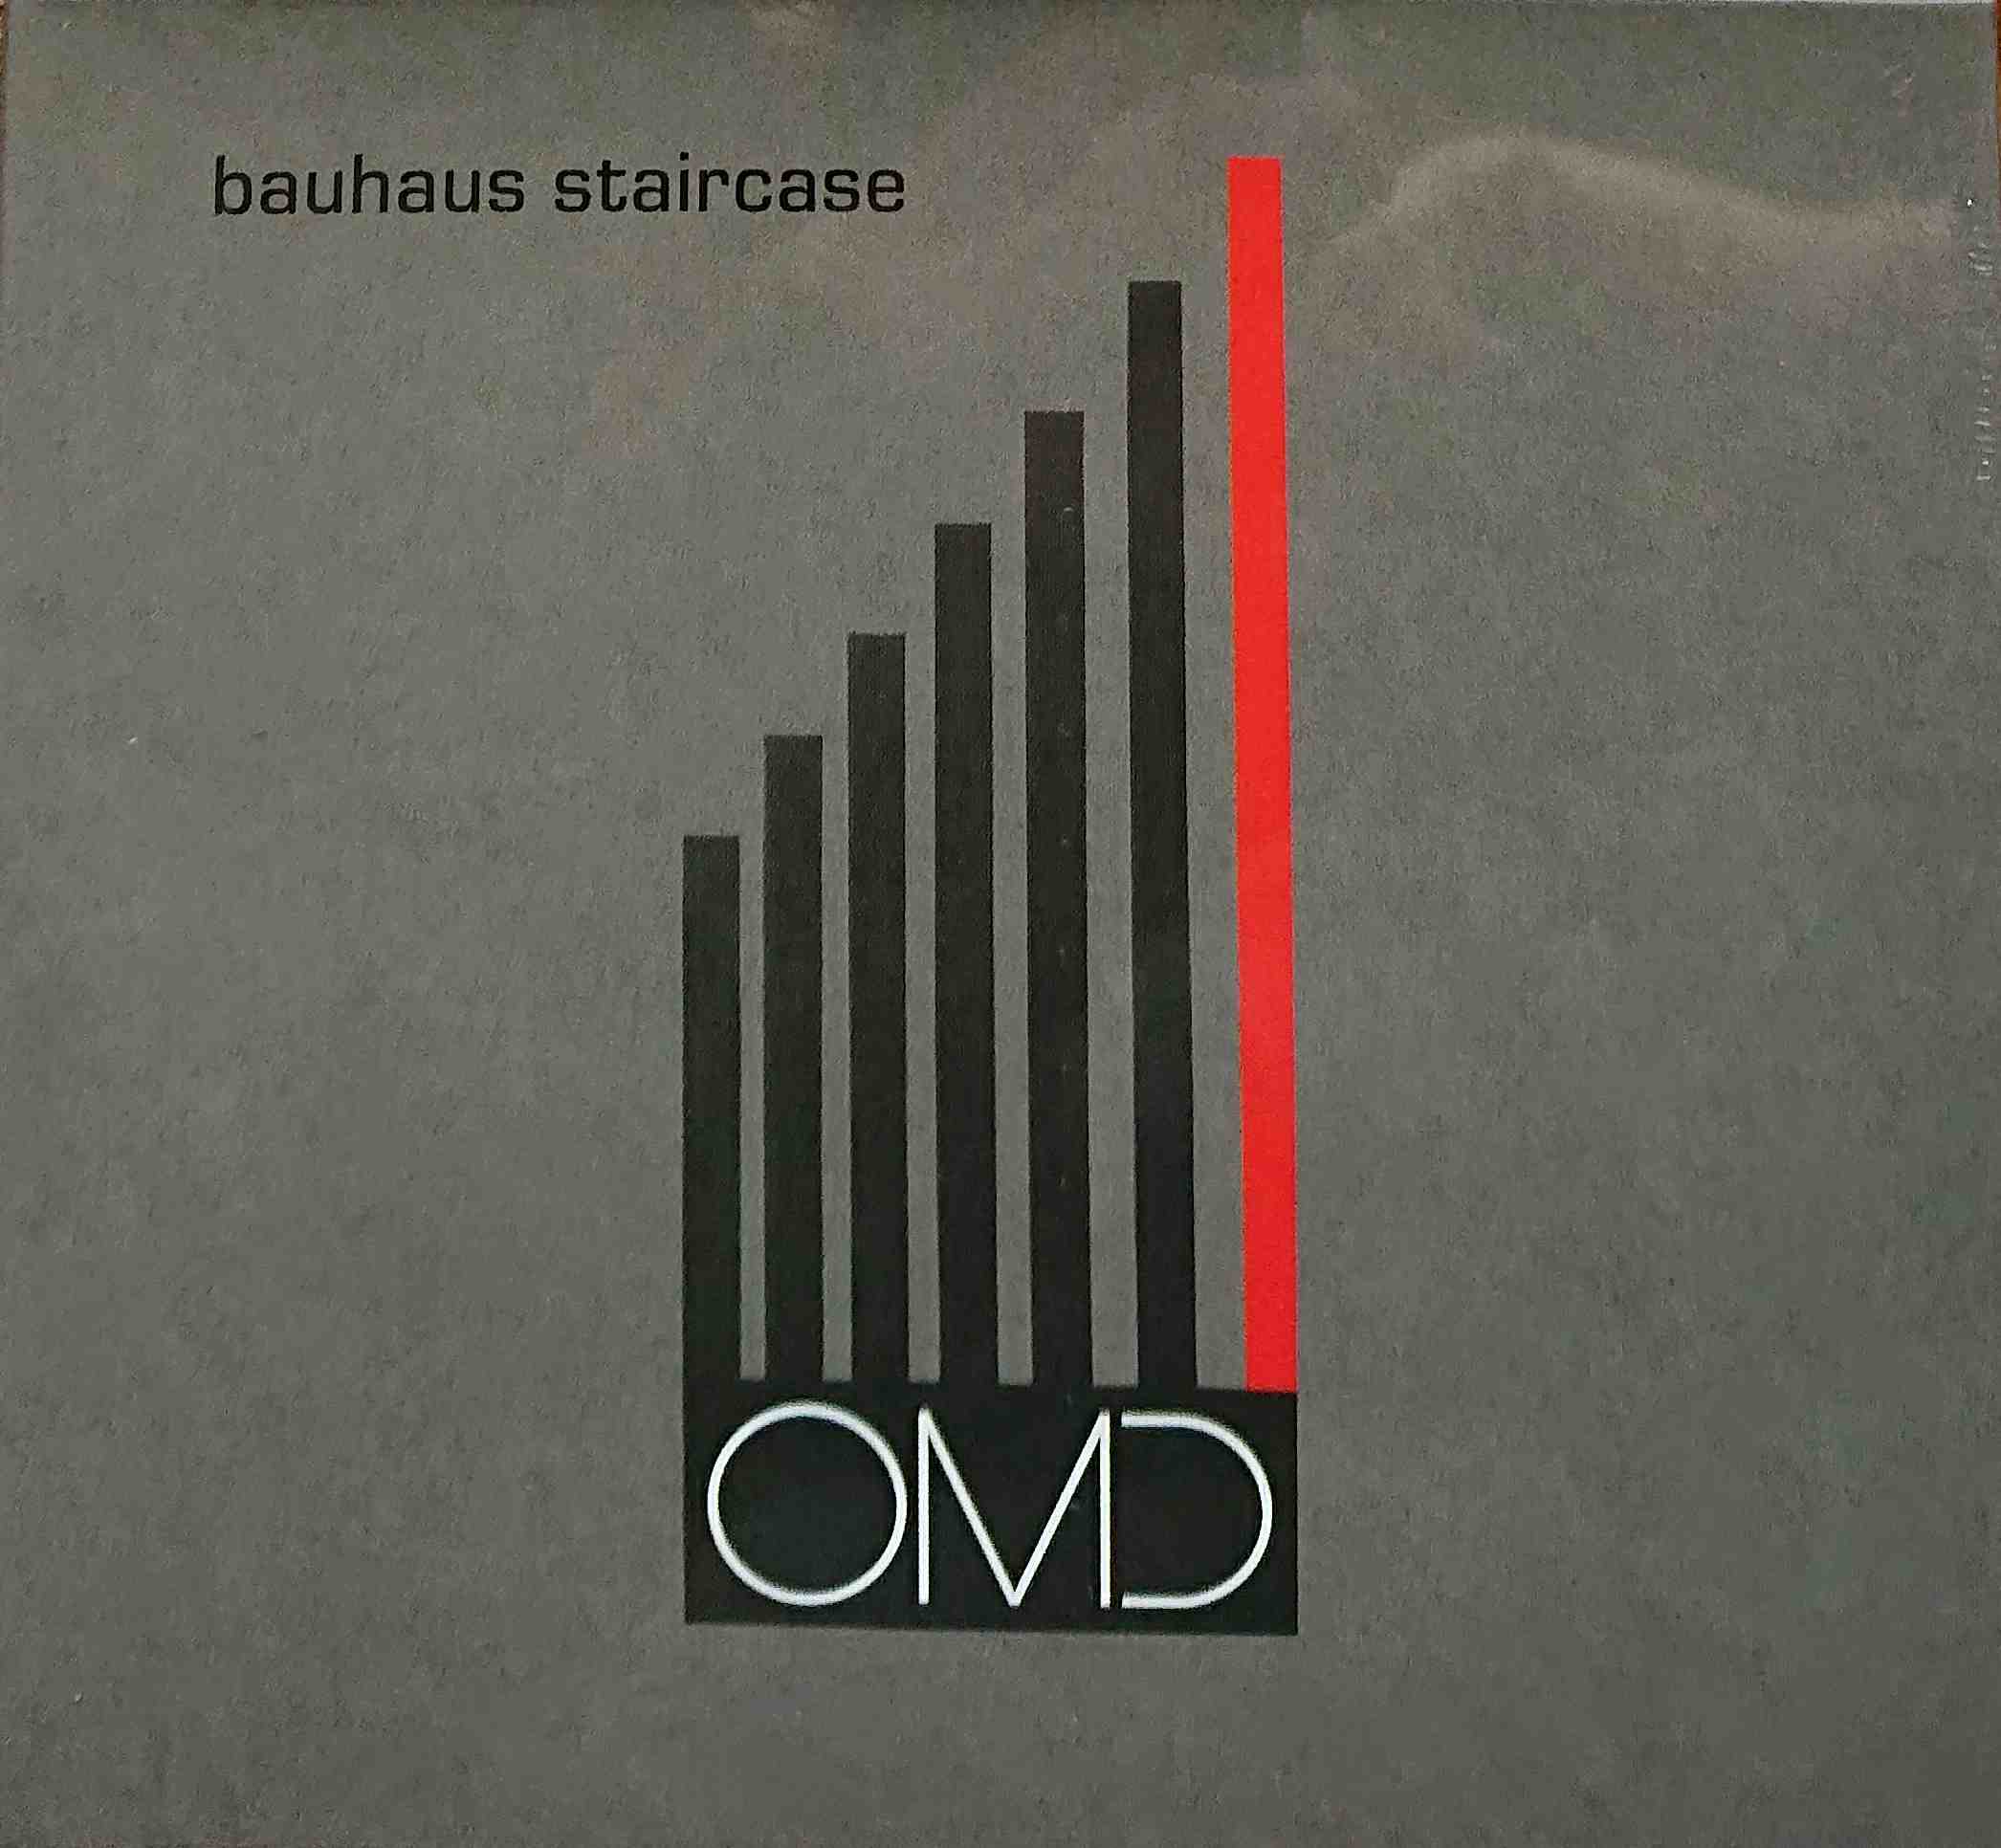 Picture of Bauhaus staircase by artist Orchestral Manoeuvres in the Dark 